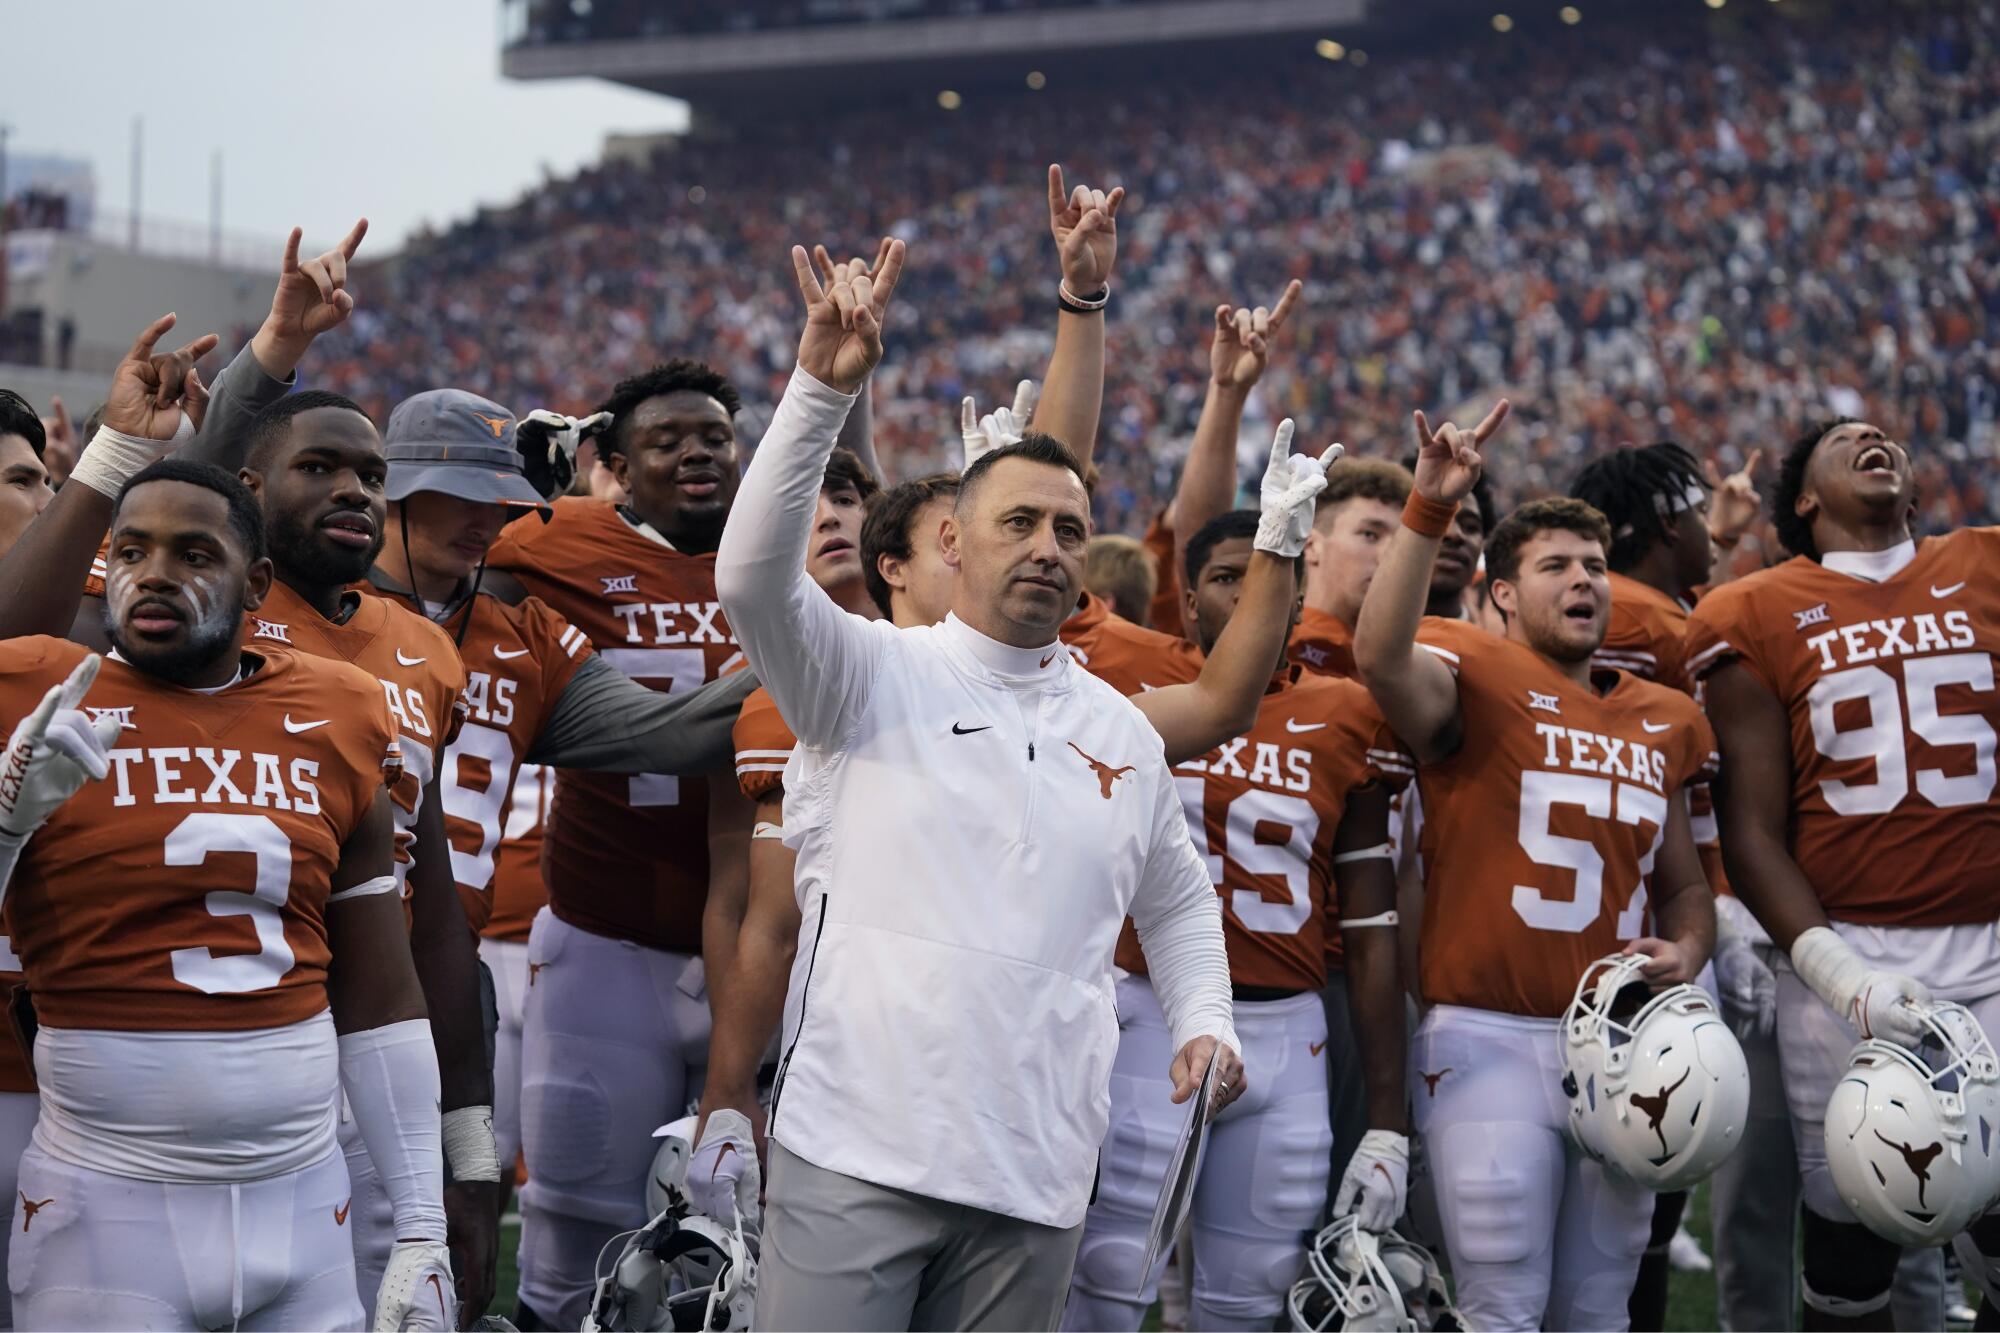 Texas coach Steve Sarkissian, center, joins his team for the school song after their win over Baylor in November.